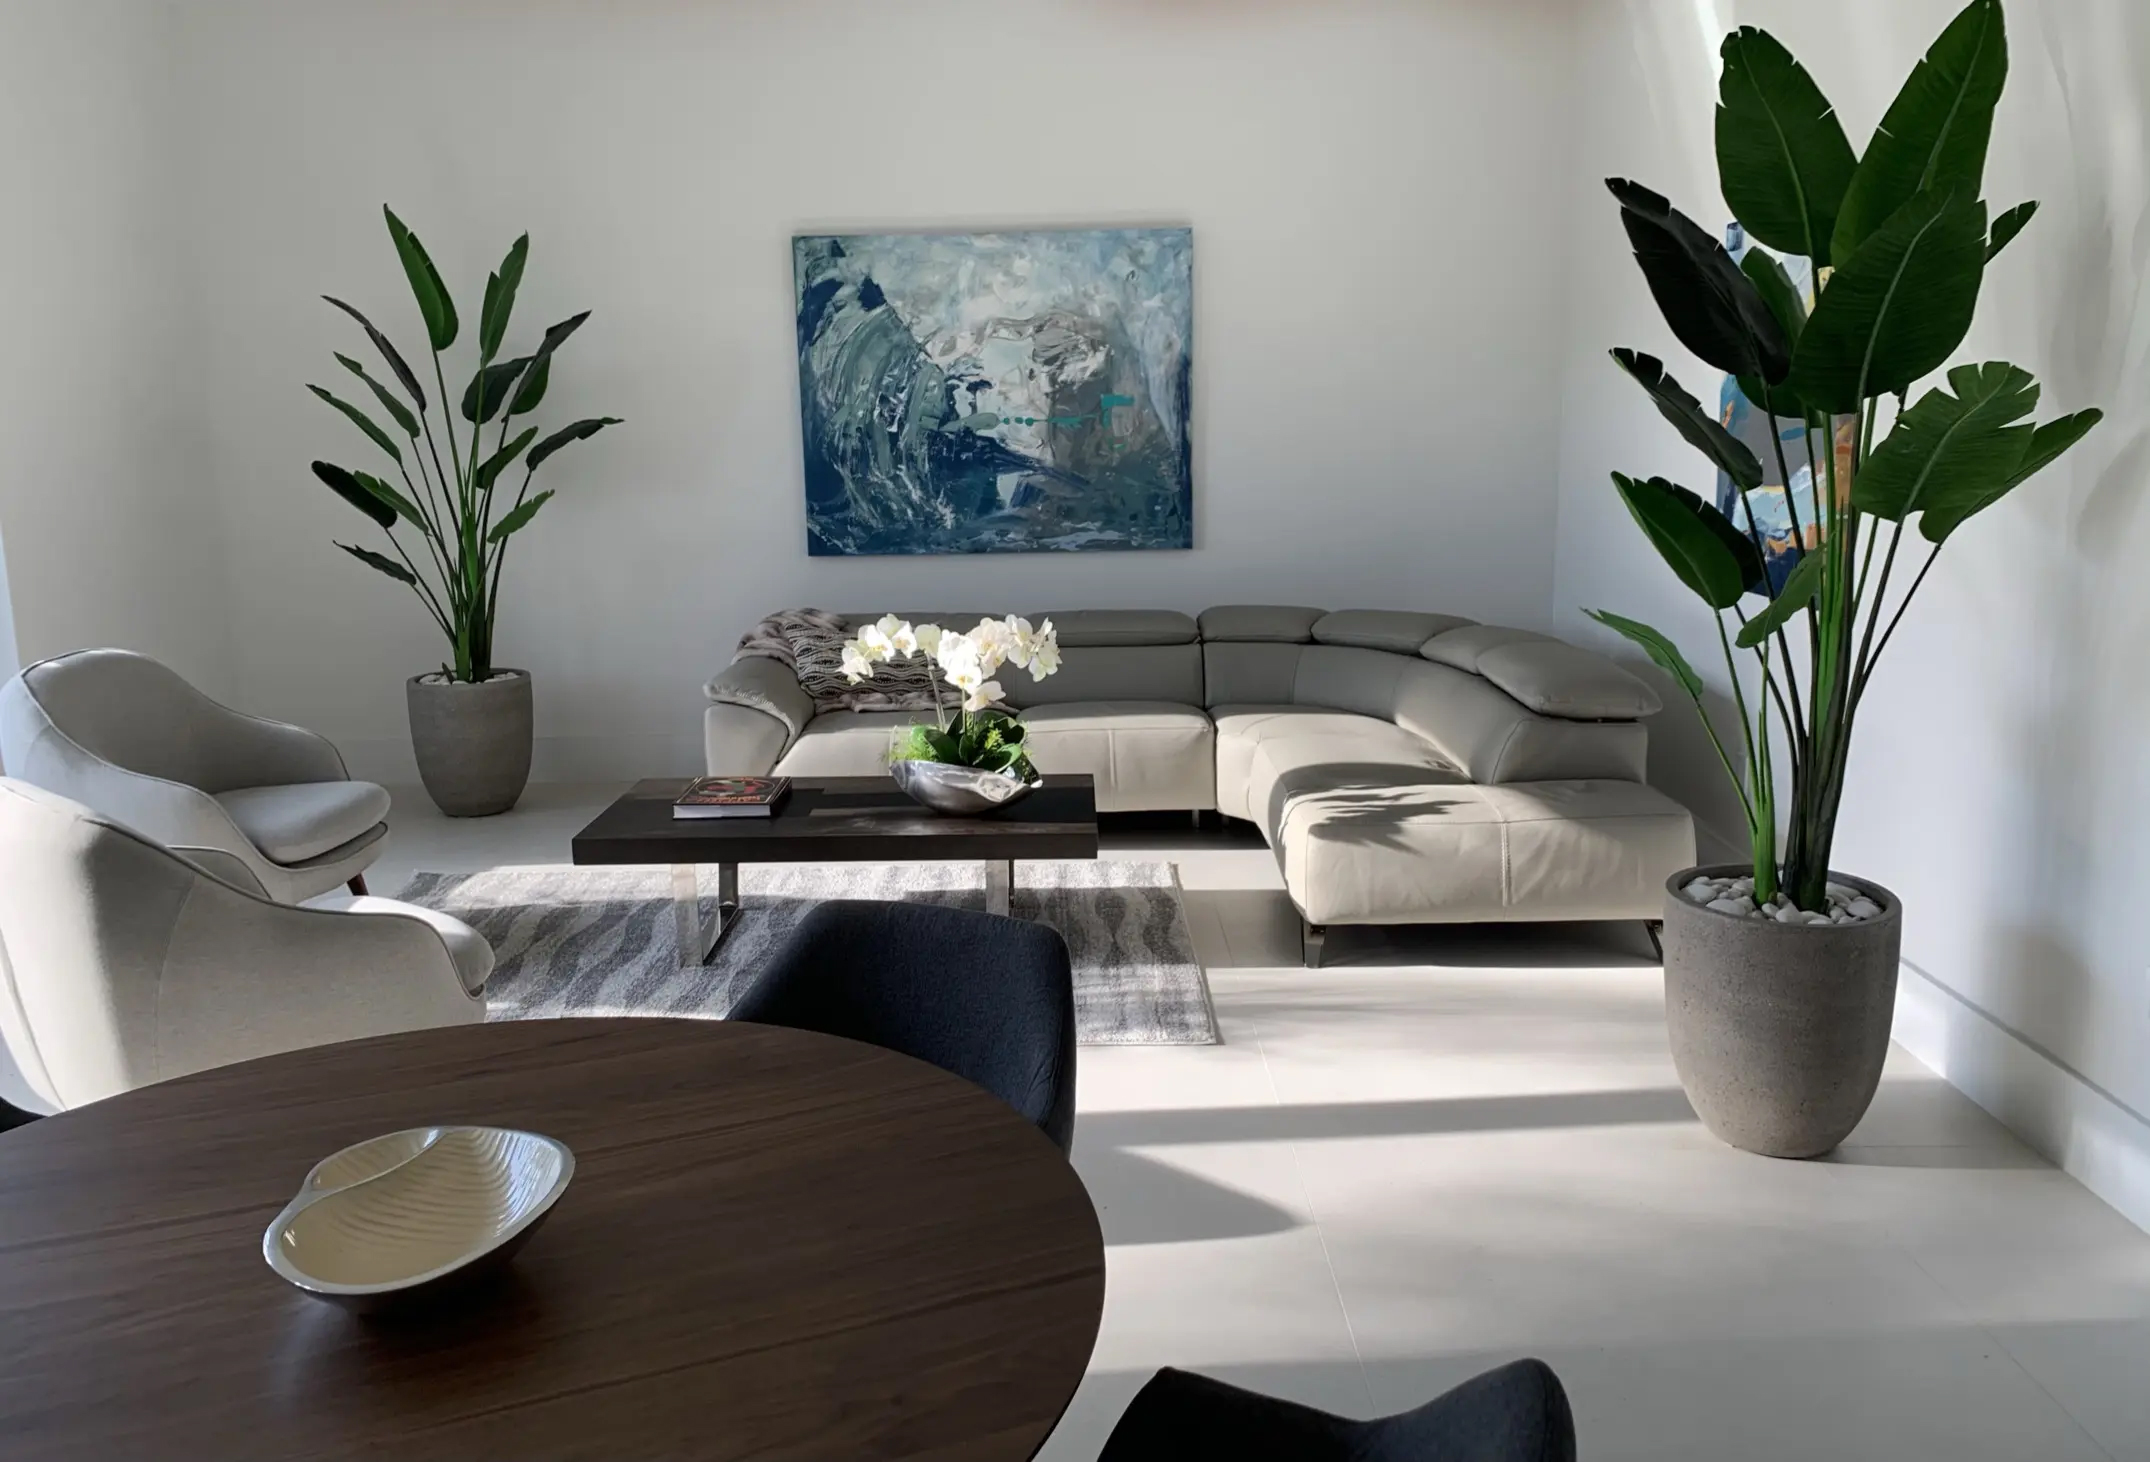 Living Room Spaces and Design